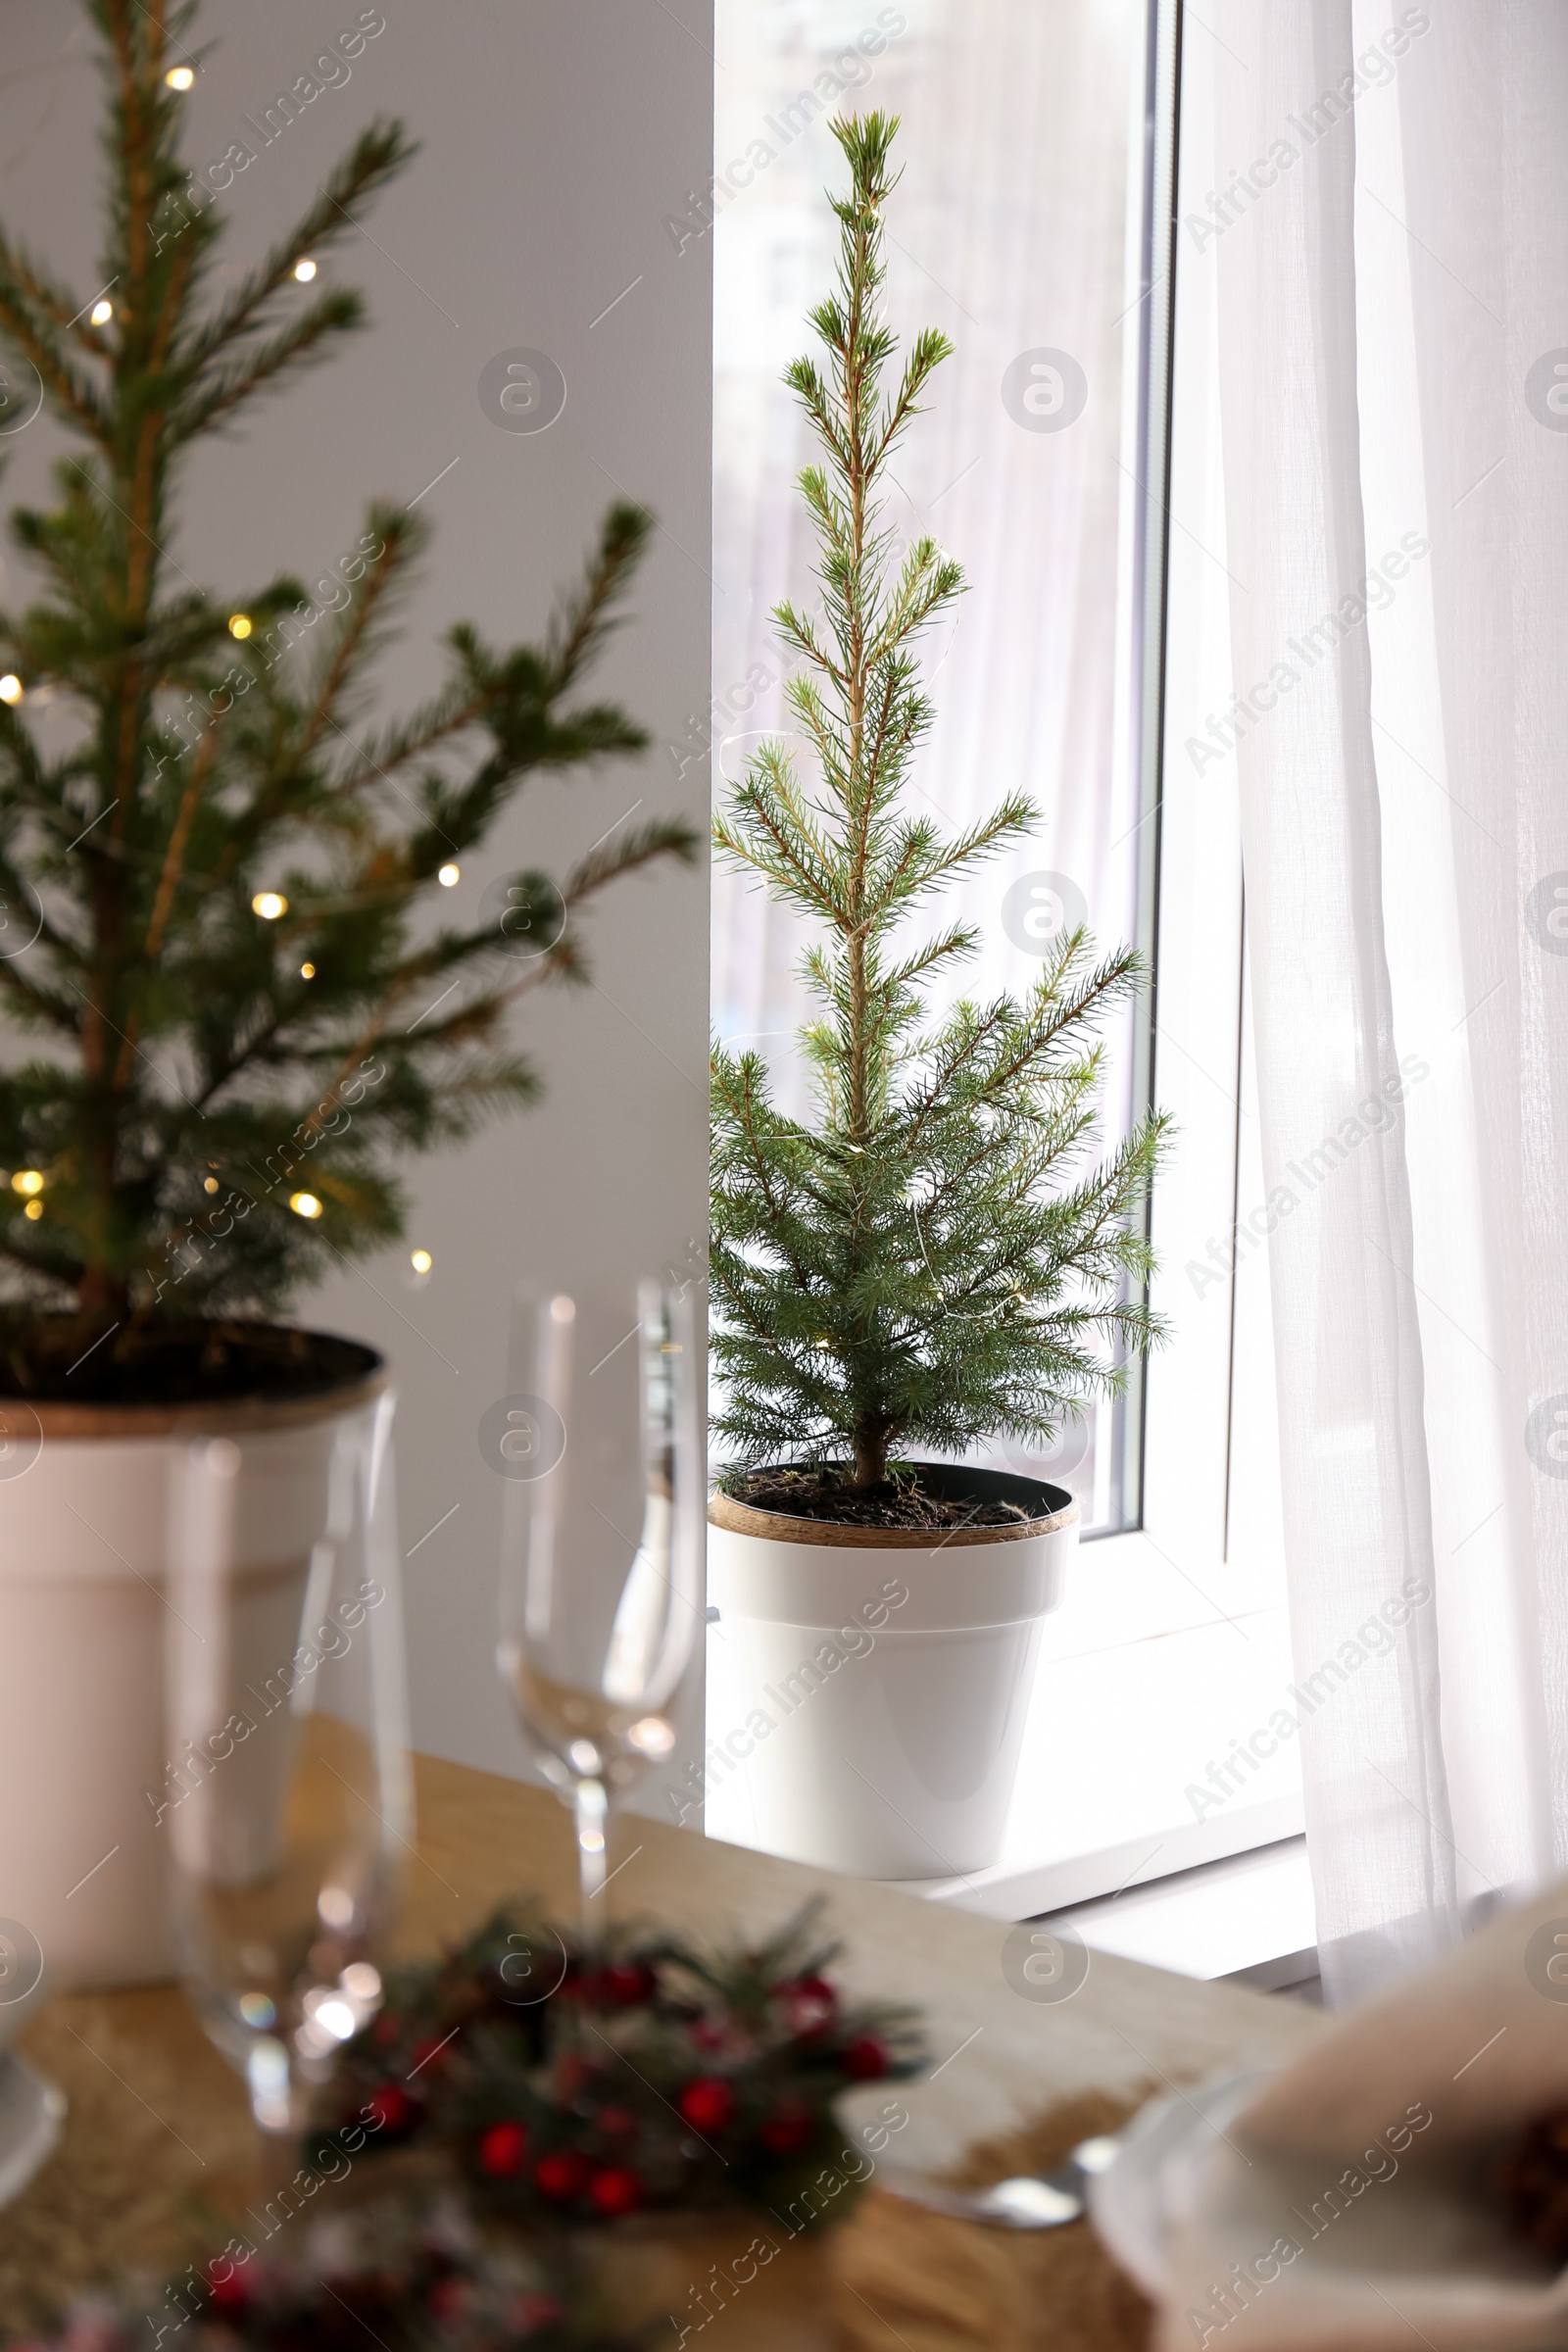 Photo of Small potted fir trees in dining room. Interior design